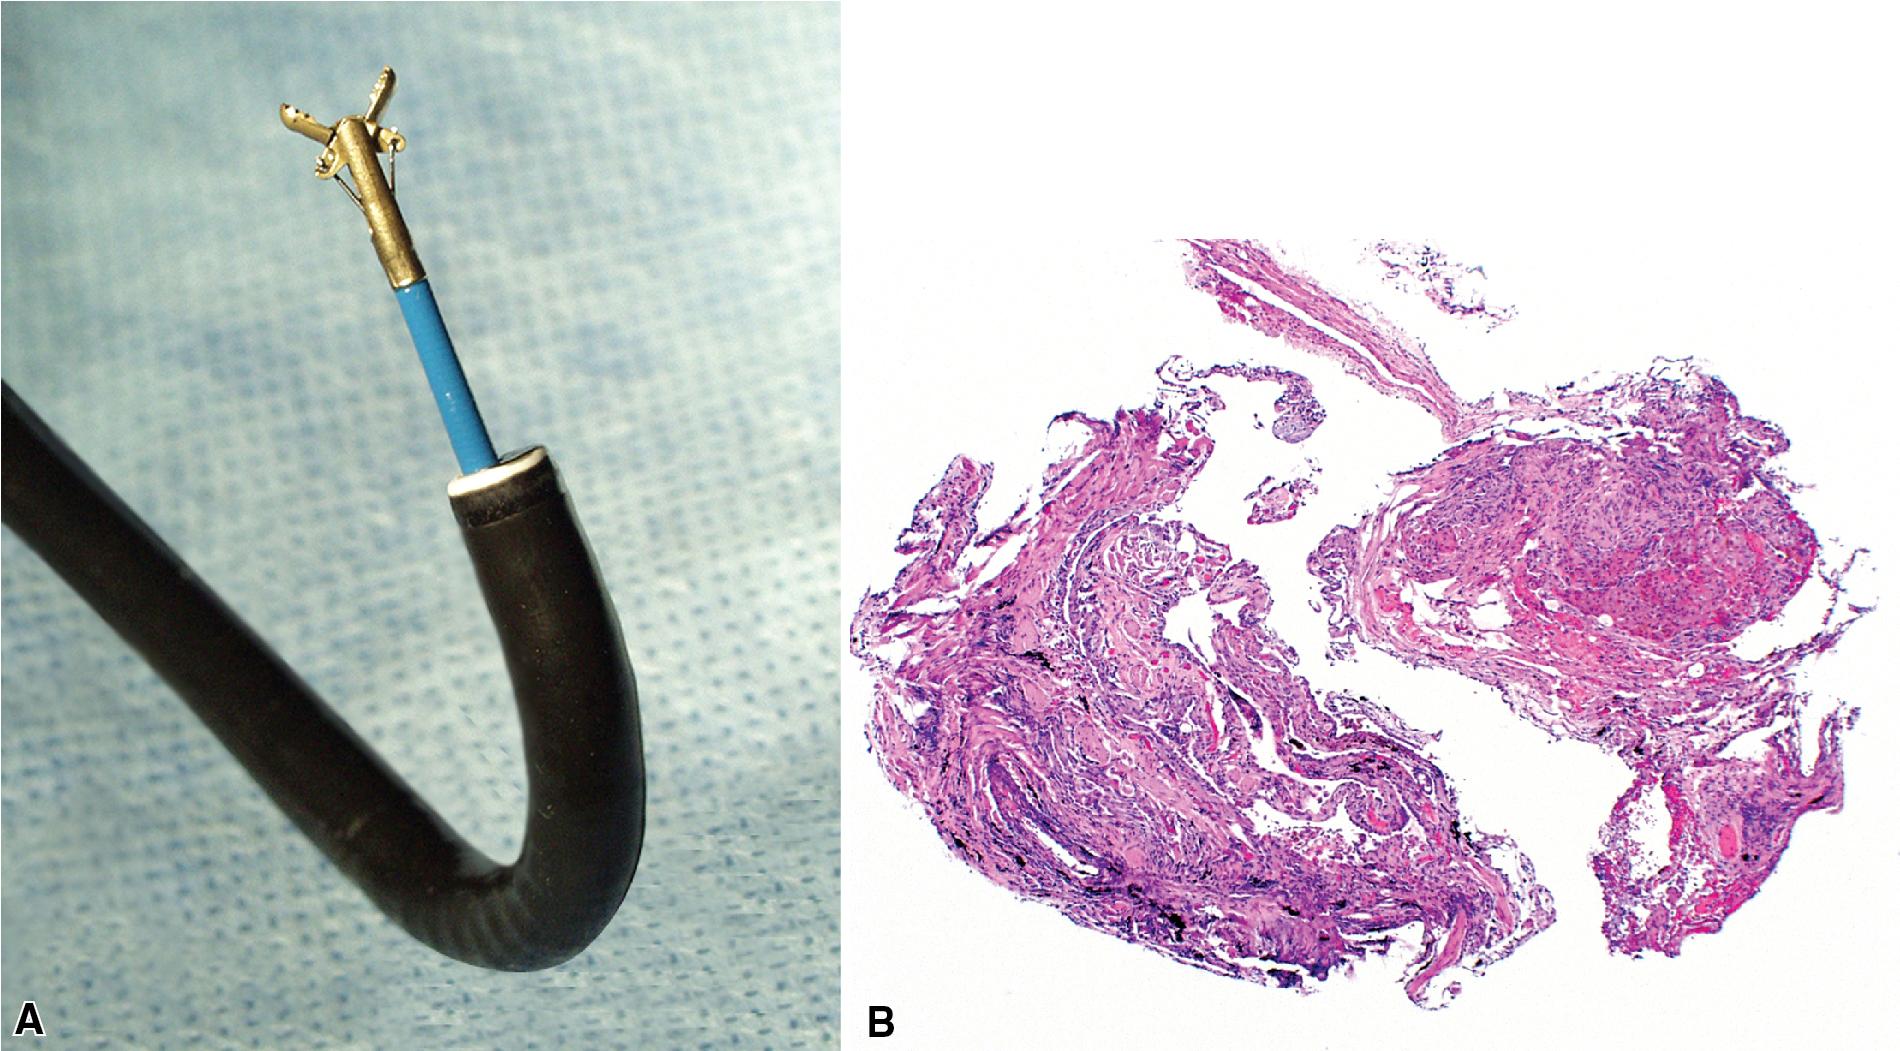 Figure 3.3, Bronchoscopic biopsy. (A) Cupped biopsy forceps. (B) Bronchoscopic biopsy specimen. The airway epithelium, subepithelial tissue, and muscle wall are typically present with variable cartilage.